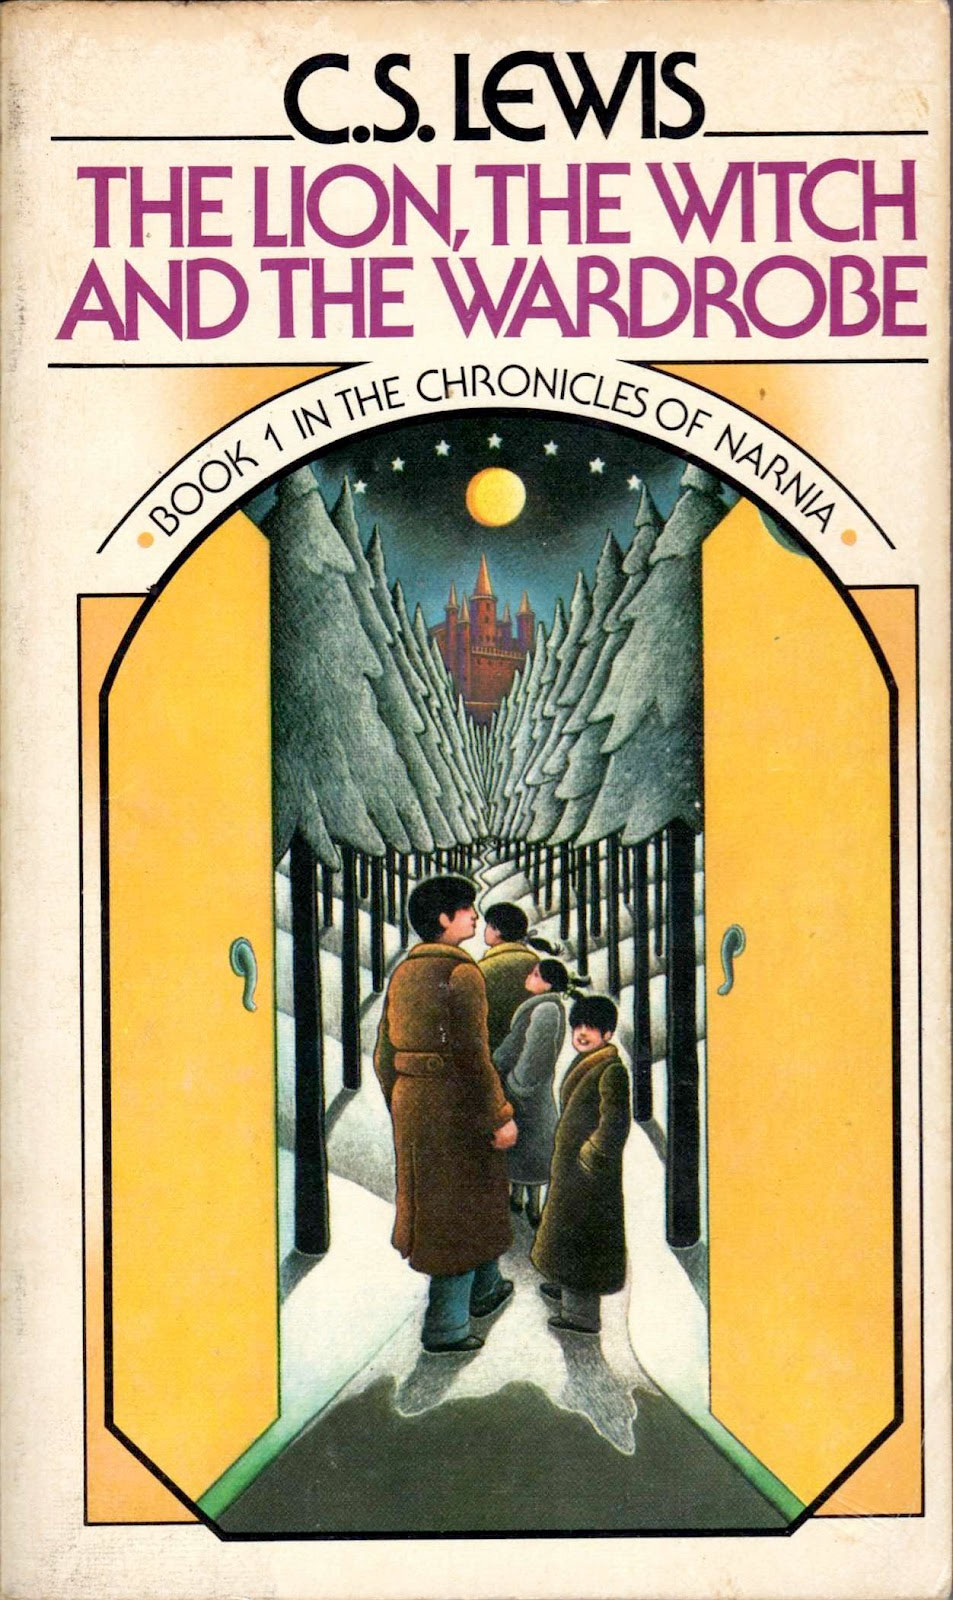 The Lion, the Witch and the Wardrobe — "The Chronicles of Narnia